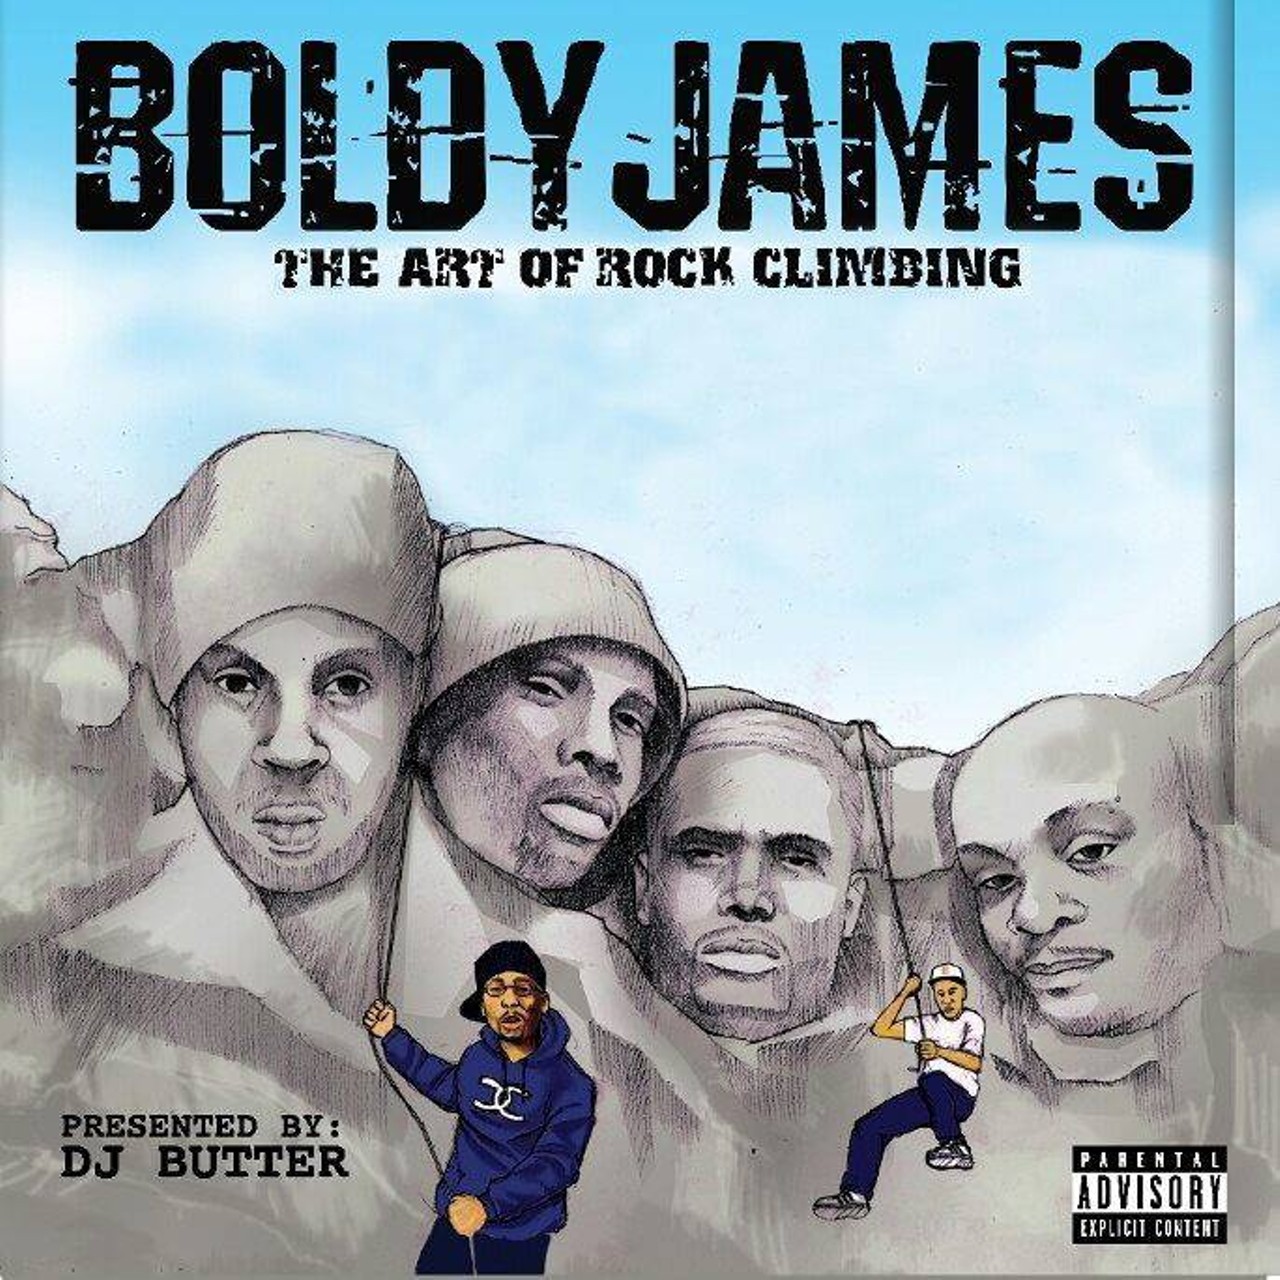 Friday, 11/4
DJ Butter
@ PJ&#146;s Lager House
This early event is a free listening party for DJ Butter&#146;s new album The Art of Rock Climbing. DJ Butter has been at the center of Detroit hip-hop for the last 20 years. He&#146;s worked with Eminem, D12, Miz Korona, and many more. He&#146;s an integral piece of Detroit hip-hop&#146;s fabric, and he&#146;s released more than 250 mixtapes in his career. Definitely one of the most talented DJs to come out of Detroit, he, Boldy James, and Kokane are going to be one hell of a group to see.
Doors at 4 p.m.; 1254 Michigan Ave., Detroit.; pjslagerhouse.com; The event is free.